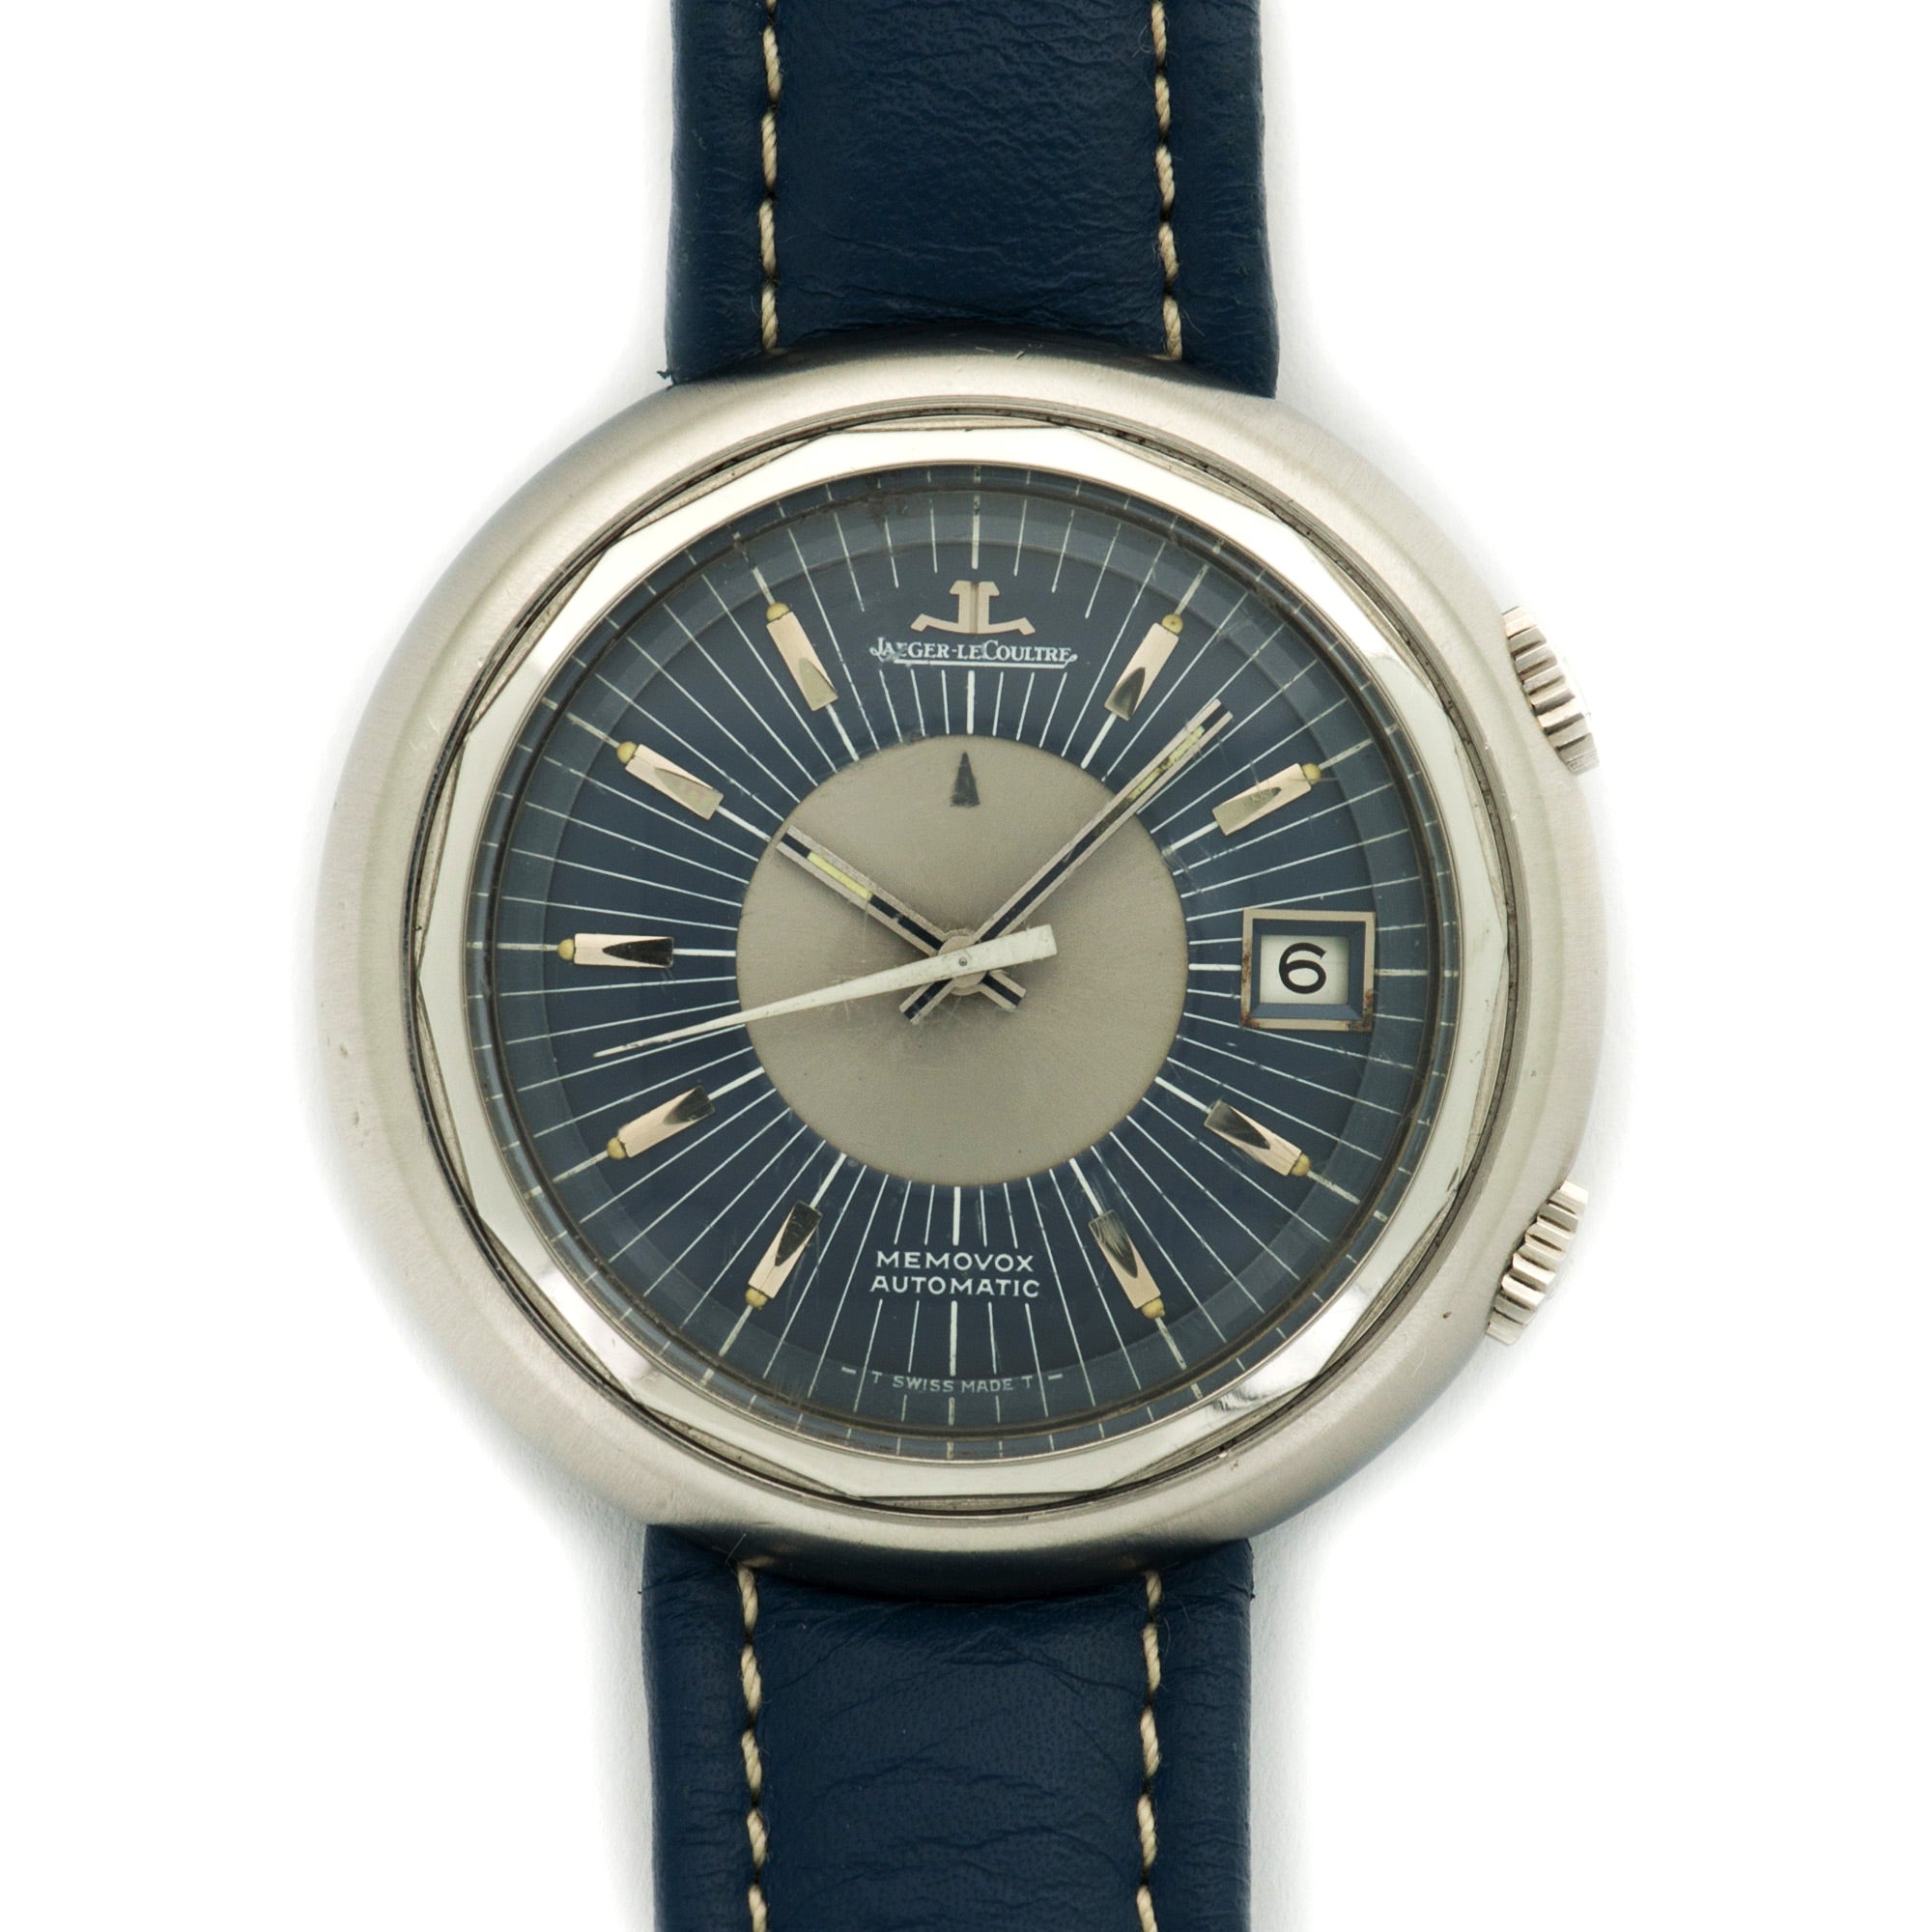 Jaeger LeCoultre - Jaeger Lecoultre Steel Memovox Snowdrop Watch Ref. E877 - The Keystone Watches